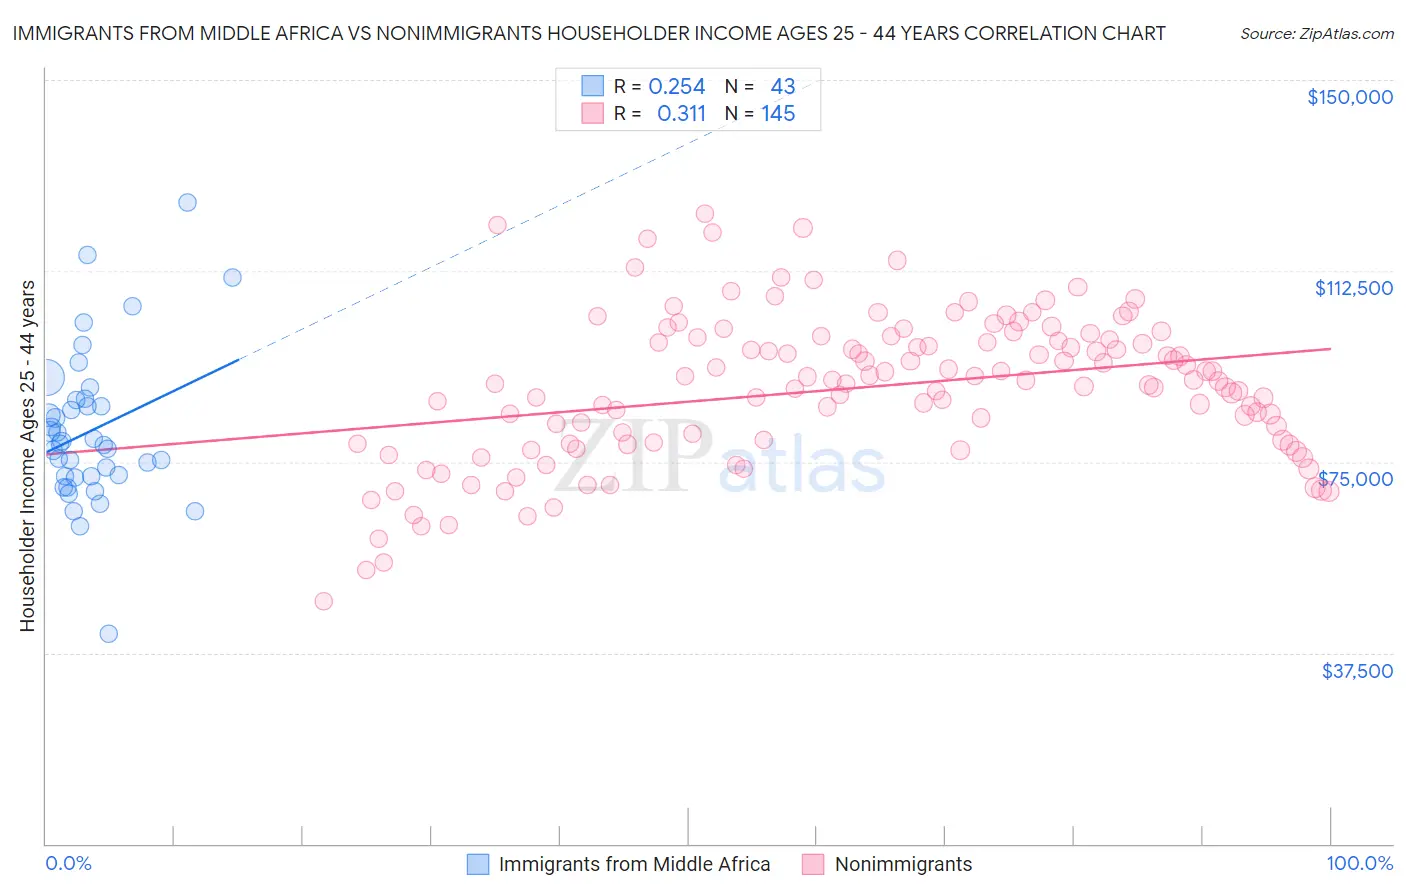 Immigrants from Middle Africa vs Nonimmigrants Householder Income Ages 25 - 44 years